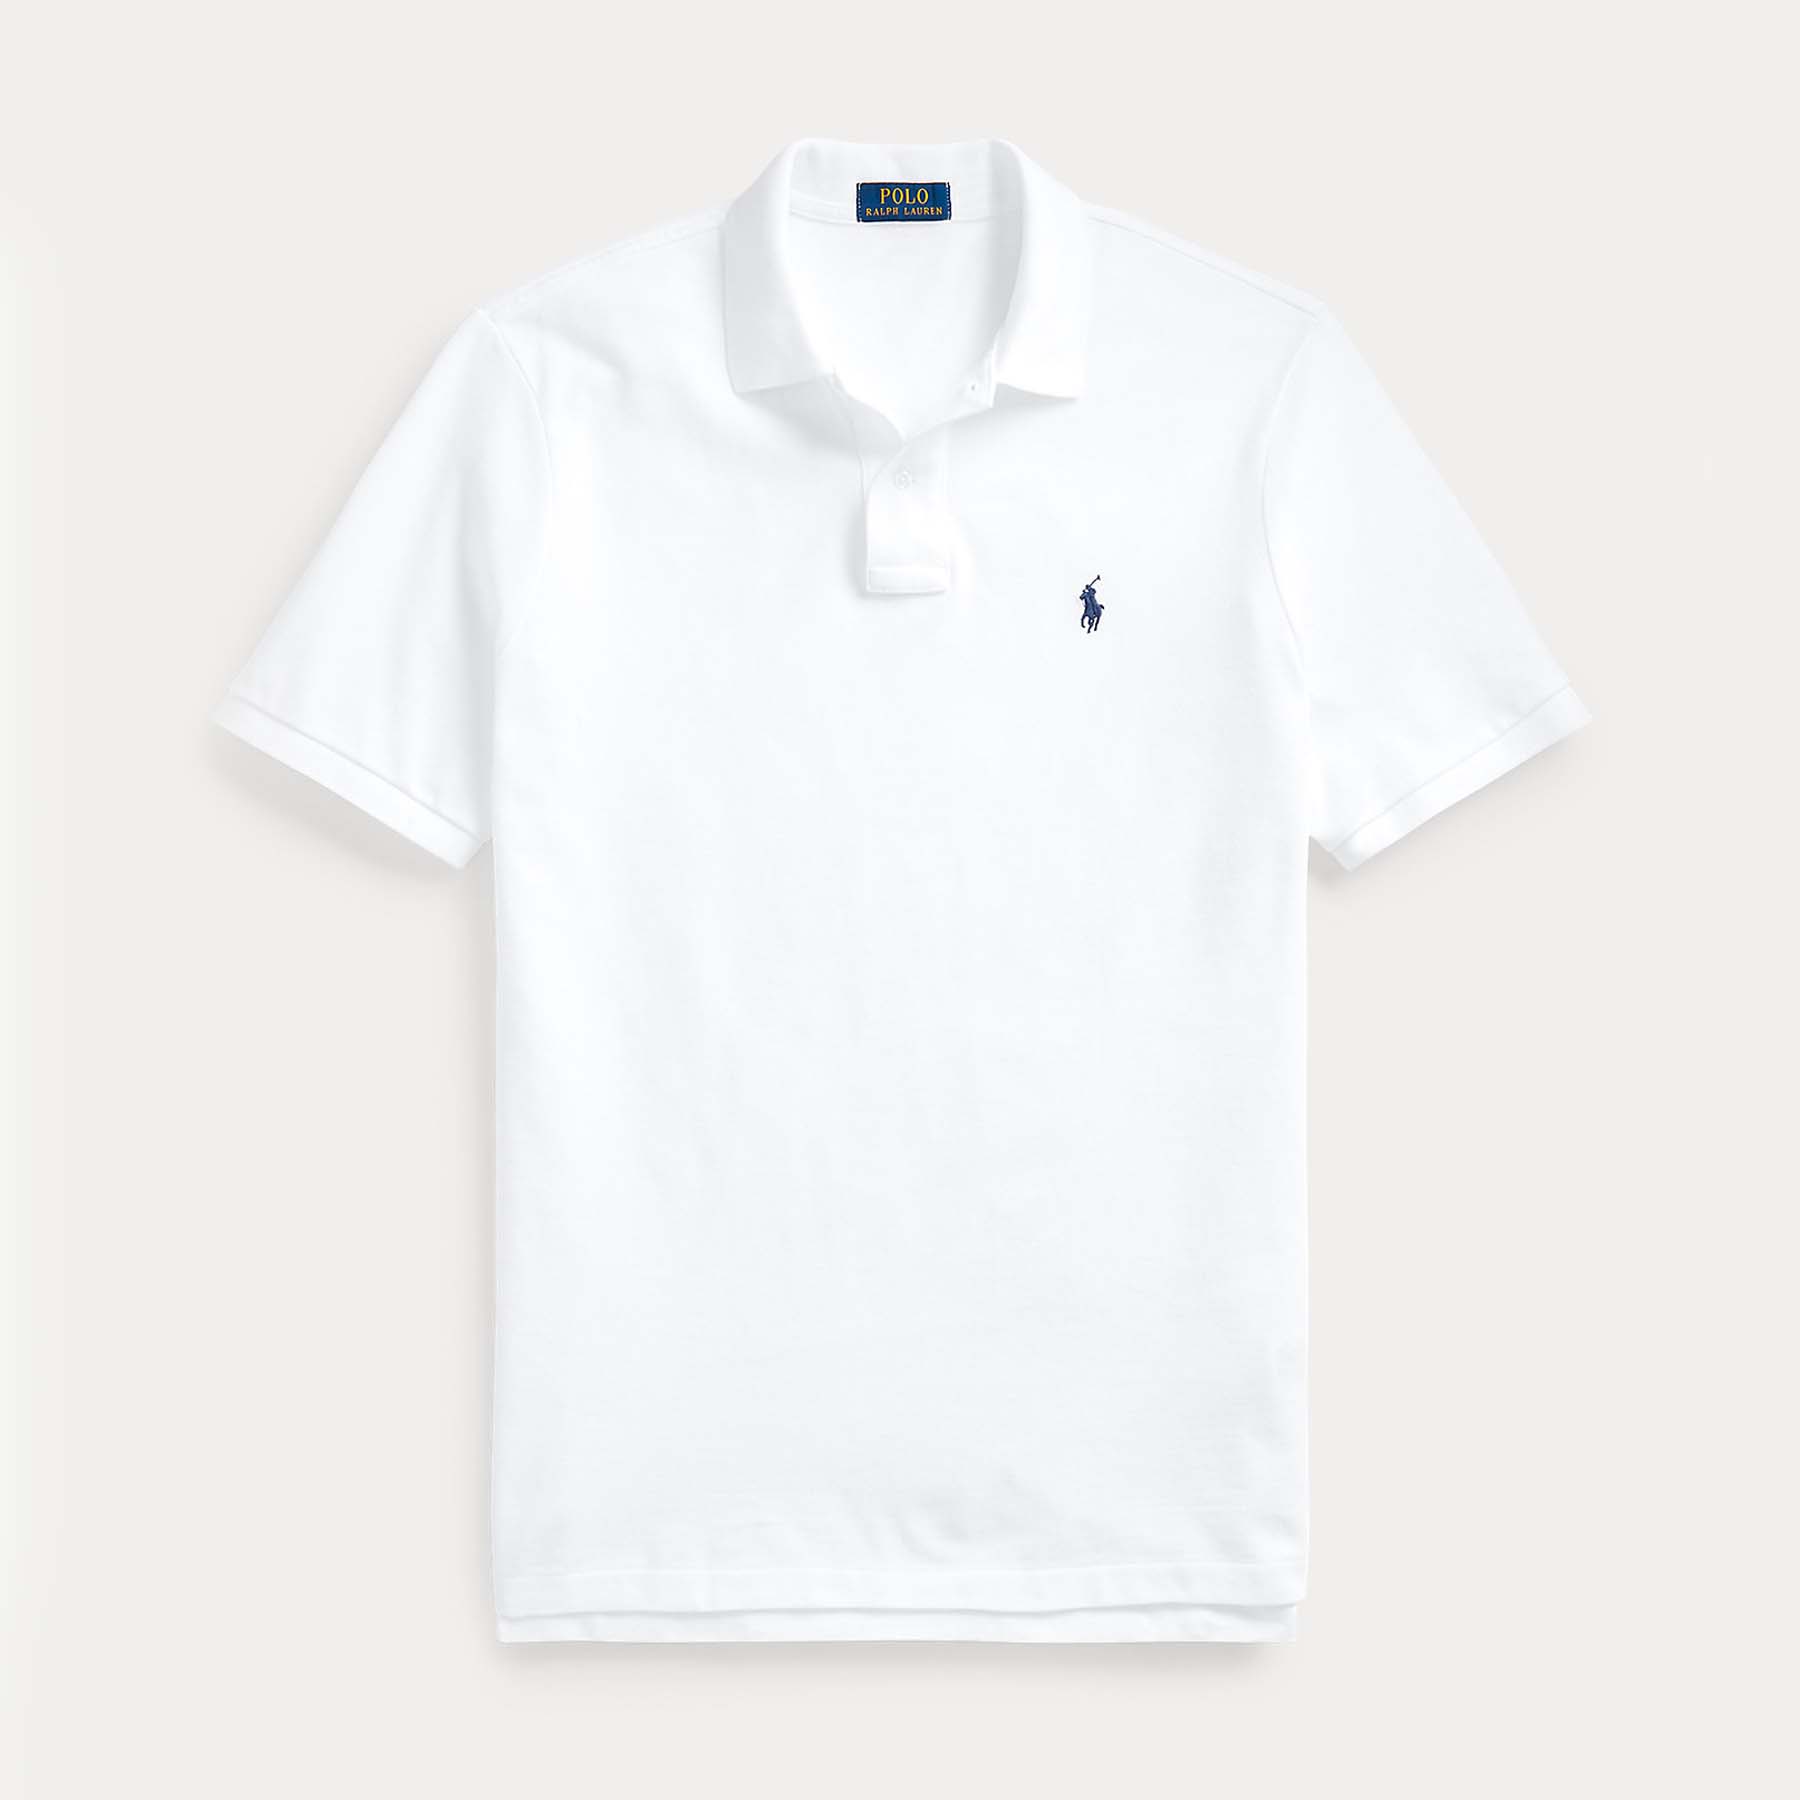 Which Polo Shirt Is Best For You? Ralph Lauren vs Lacoste